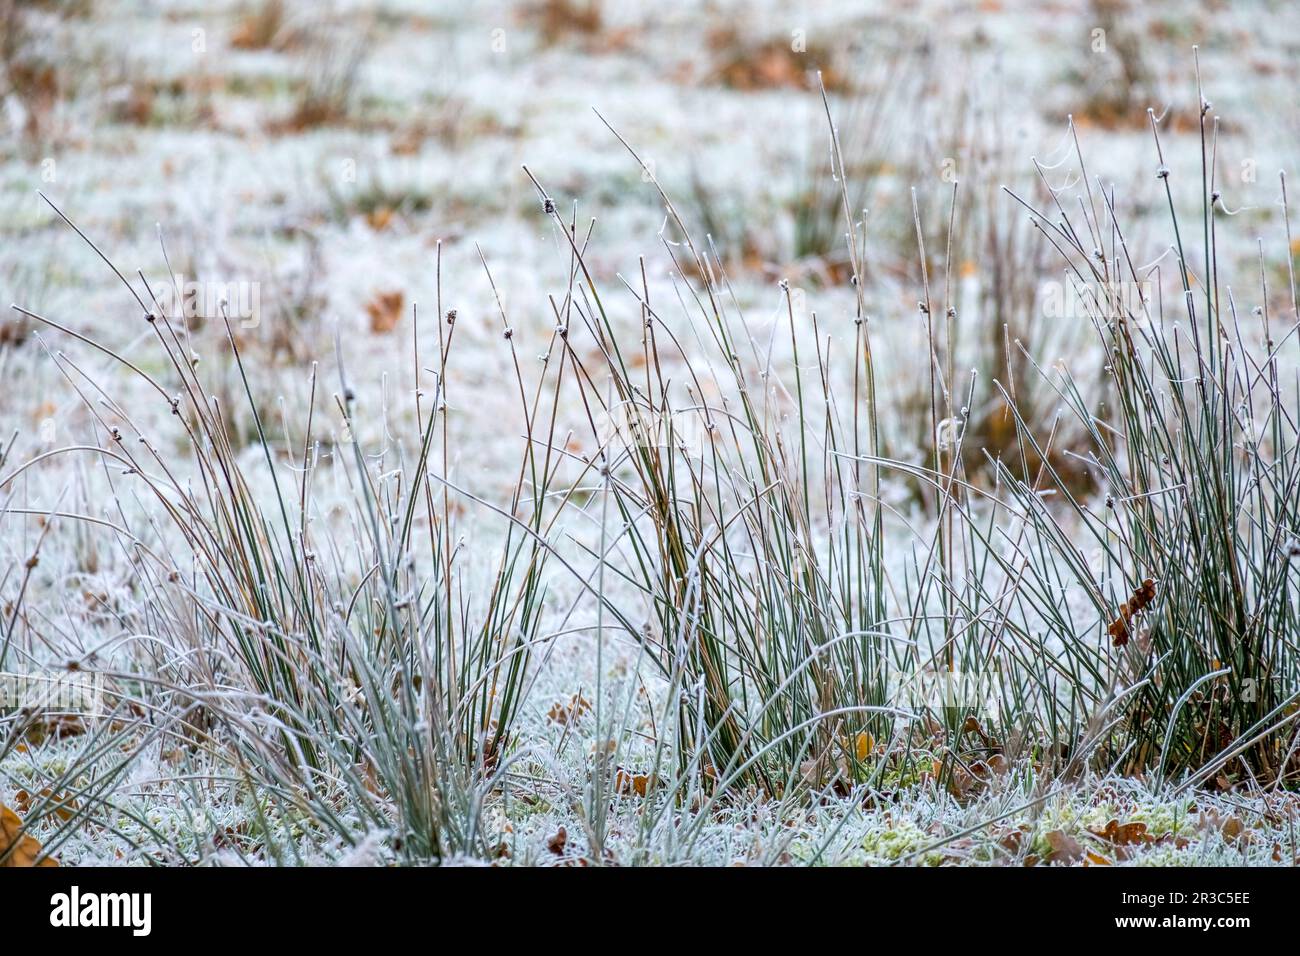 Rushes (Juncus) with hoarfrost Stock Photo